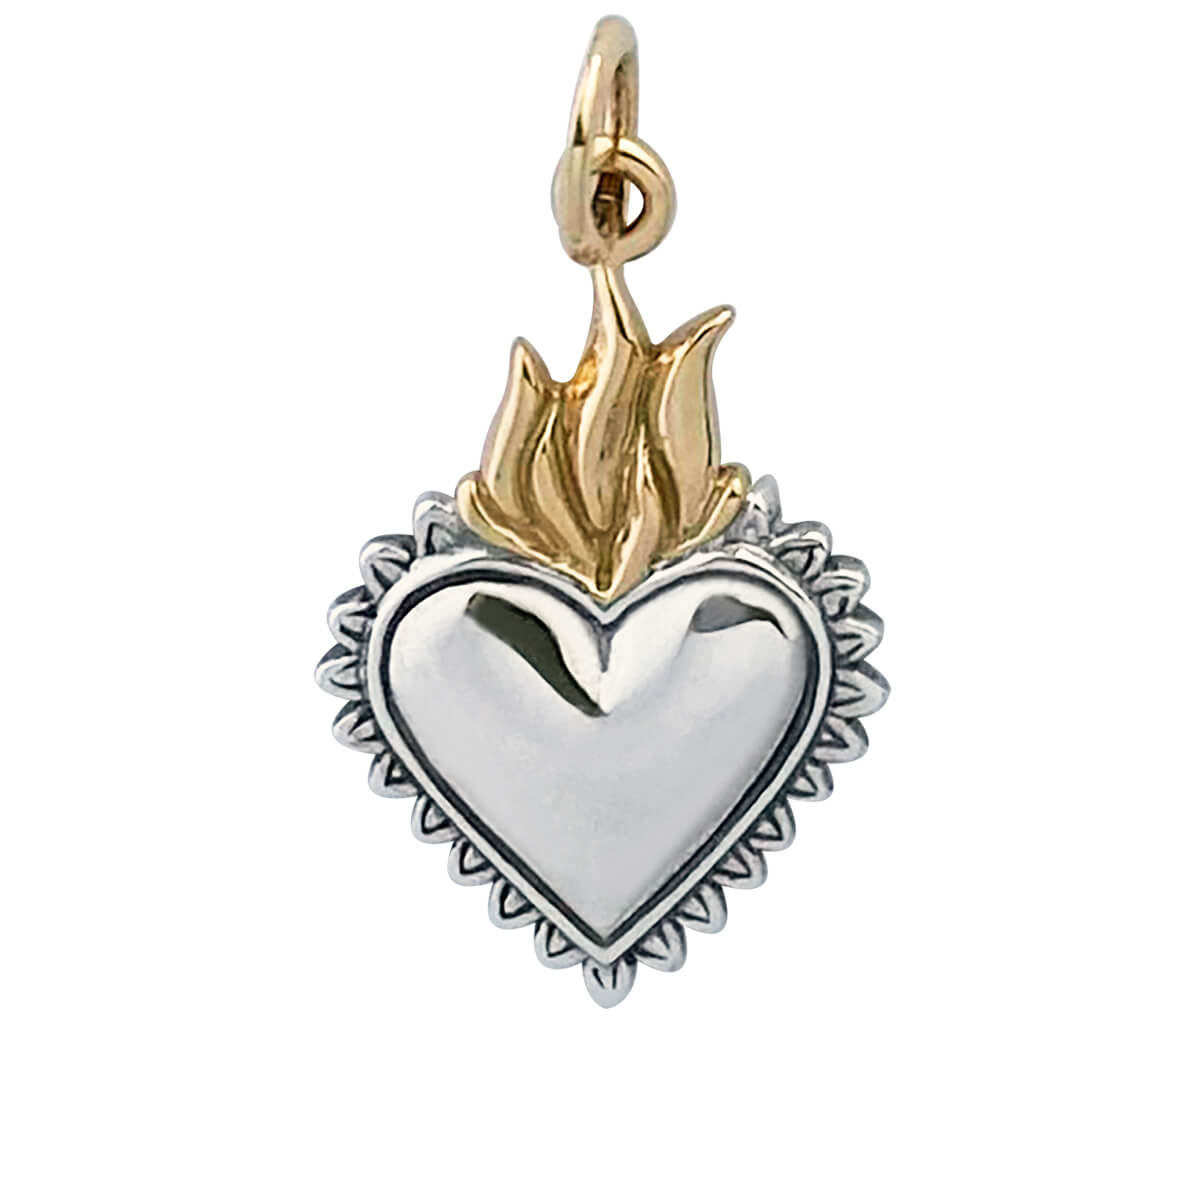 Sacred heart charm sterling silver and bronze religious pendant